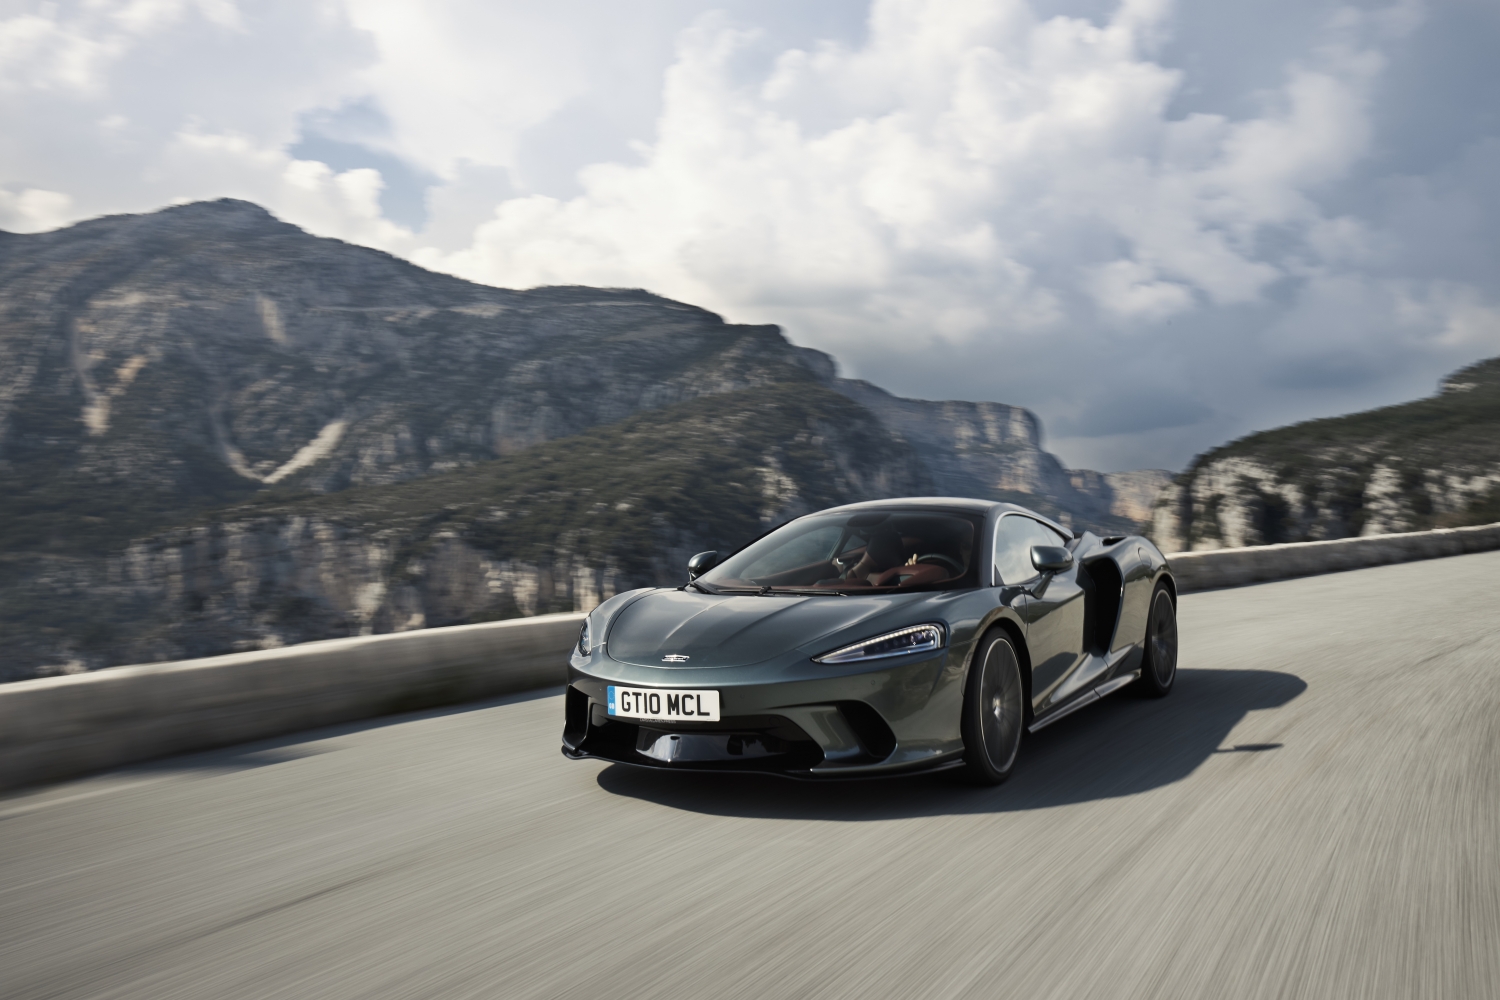 The McLaren GT along a beautiful stretch of road